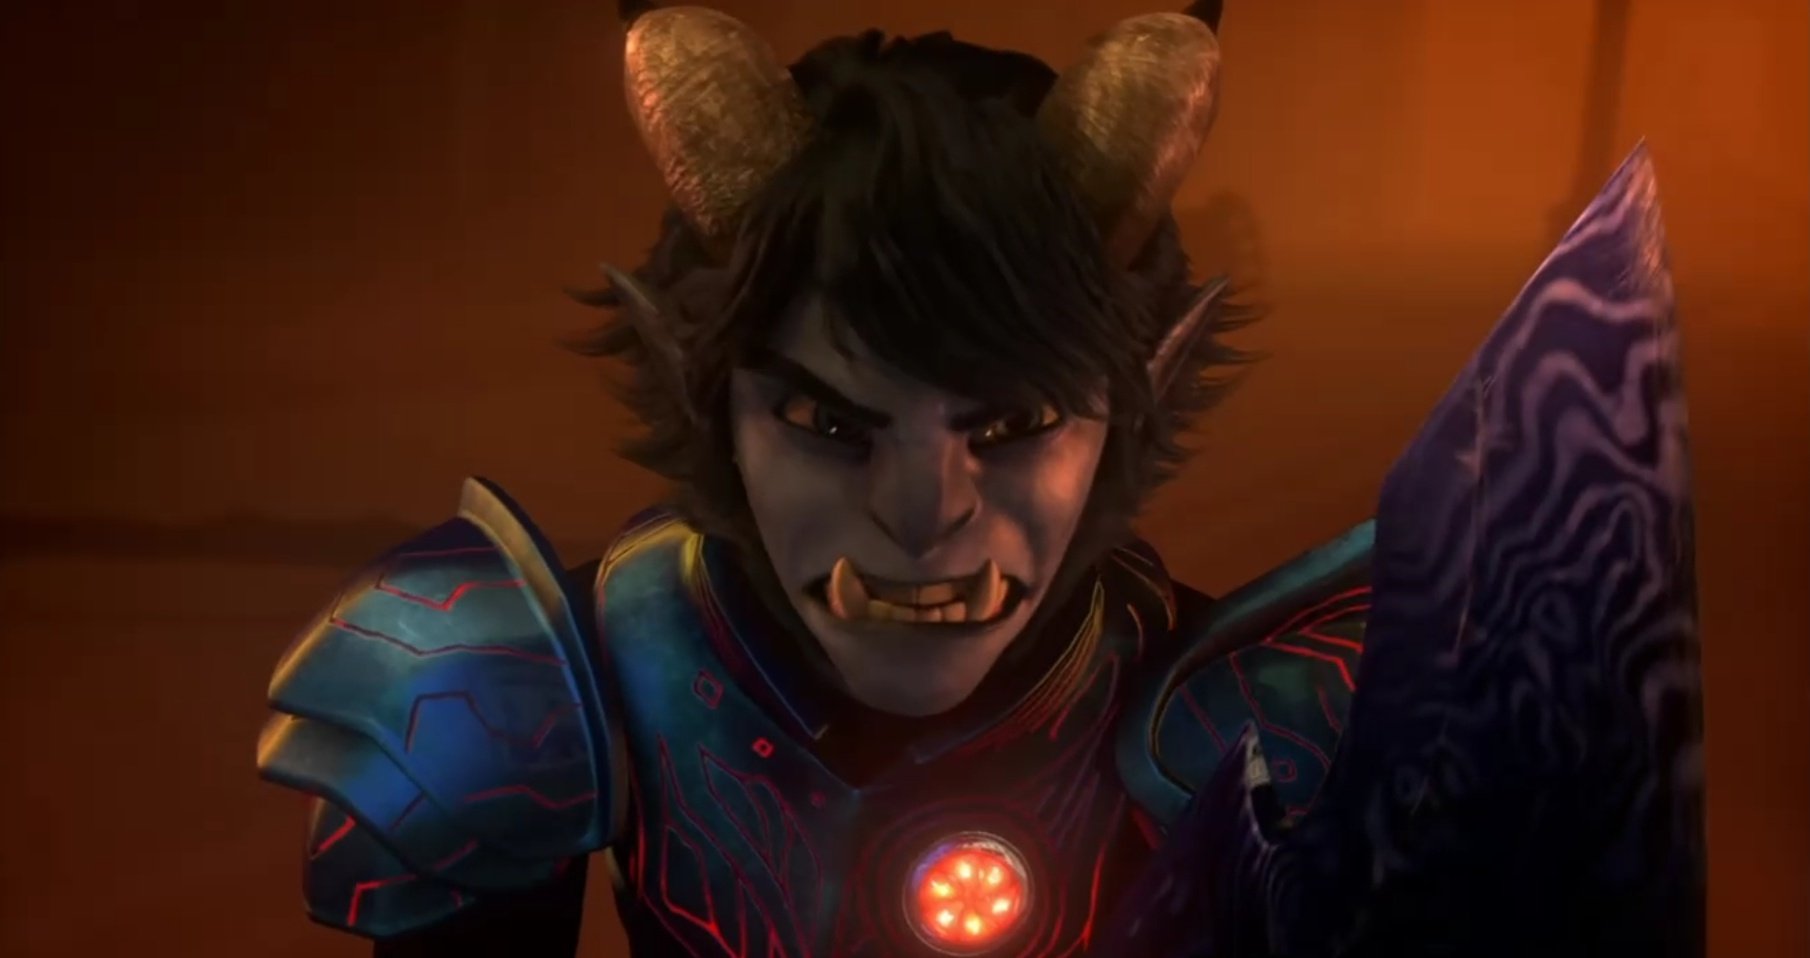 Trollhunters: Rise of the Titans on X: The wait is over. The epic  conclusion to the Tales of Arcadia saga, #TrollhuntersRiseOfTheTitans is  now streaming on Netflix!  / X